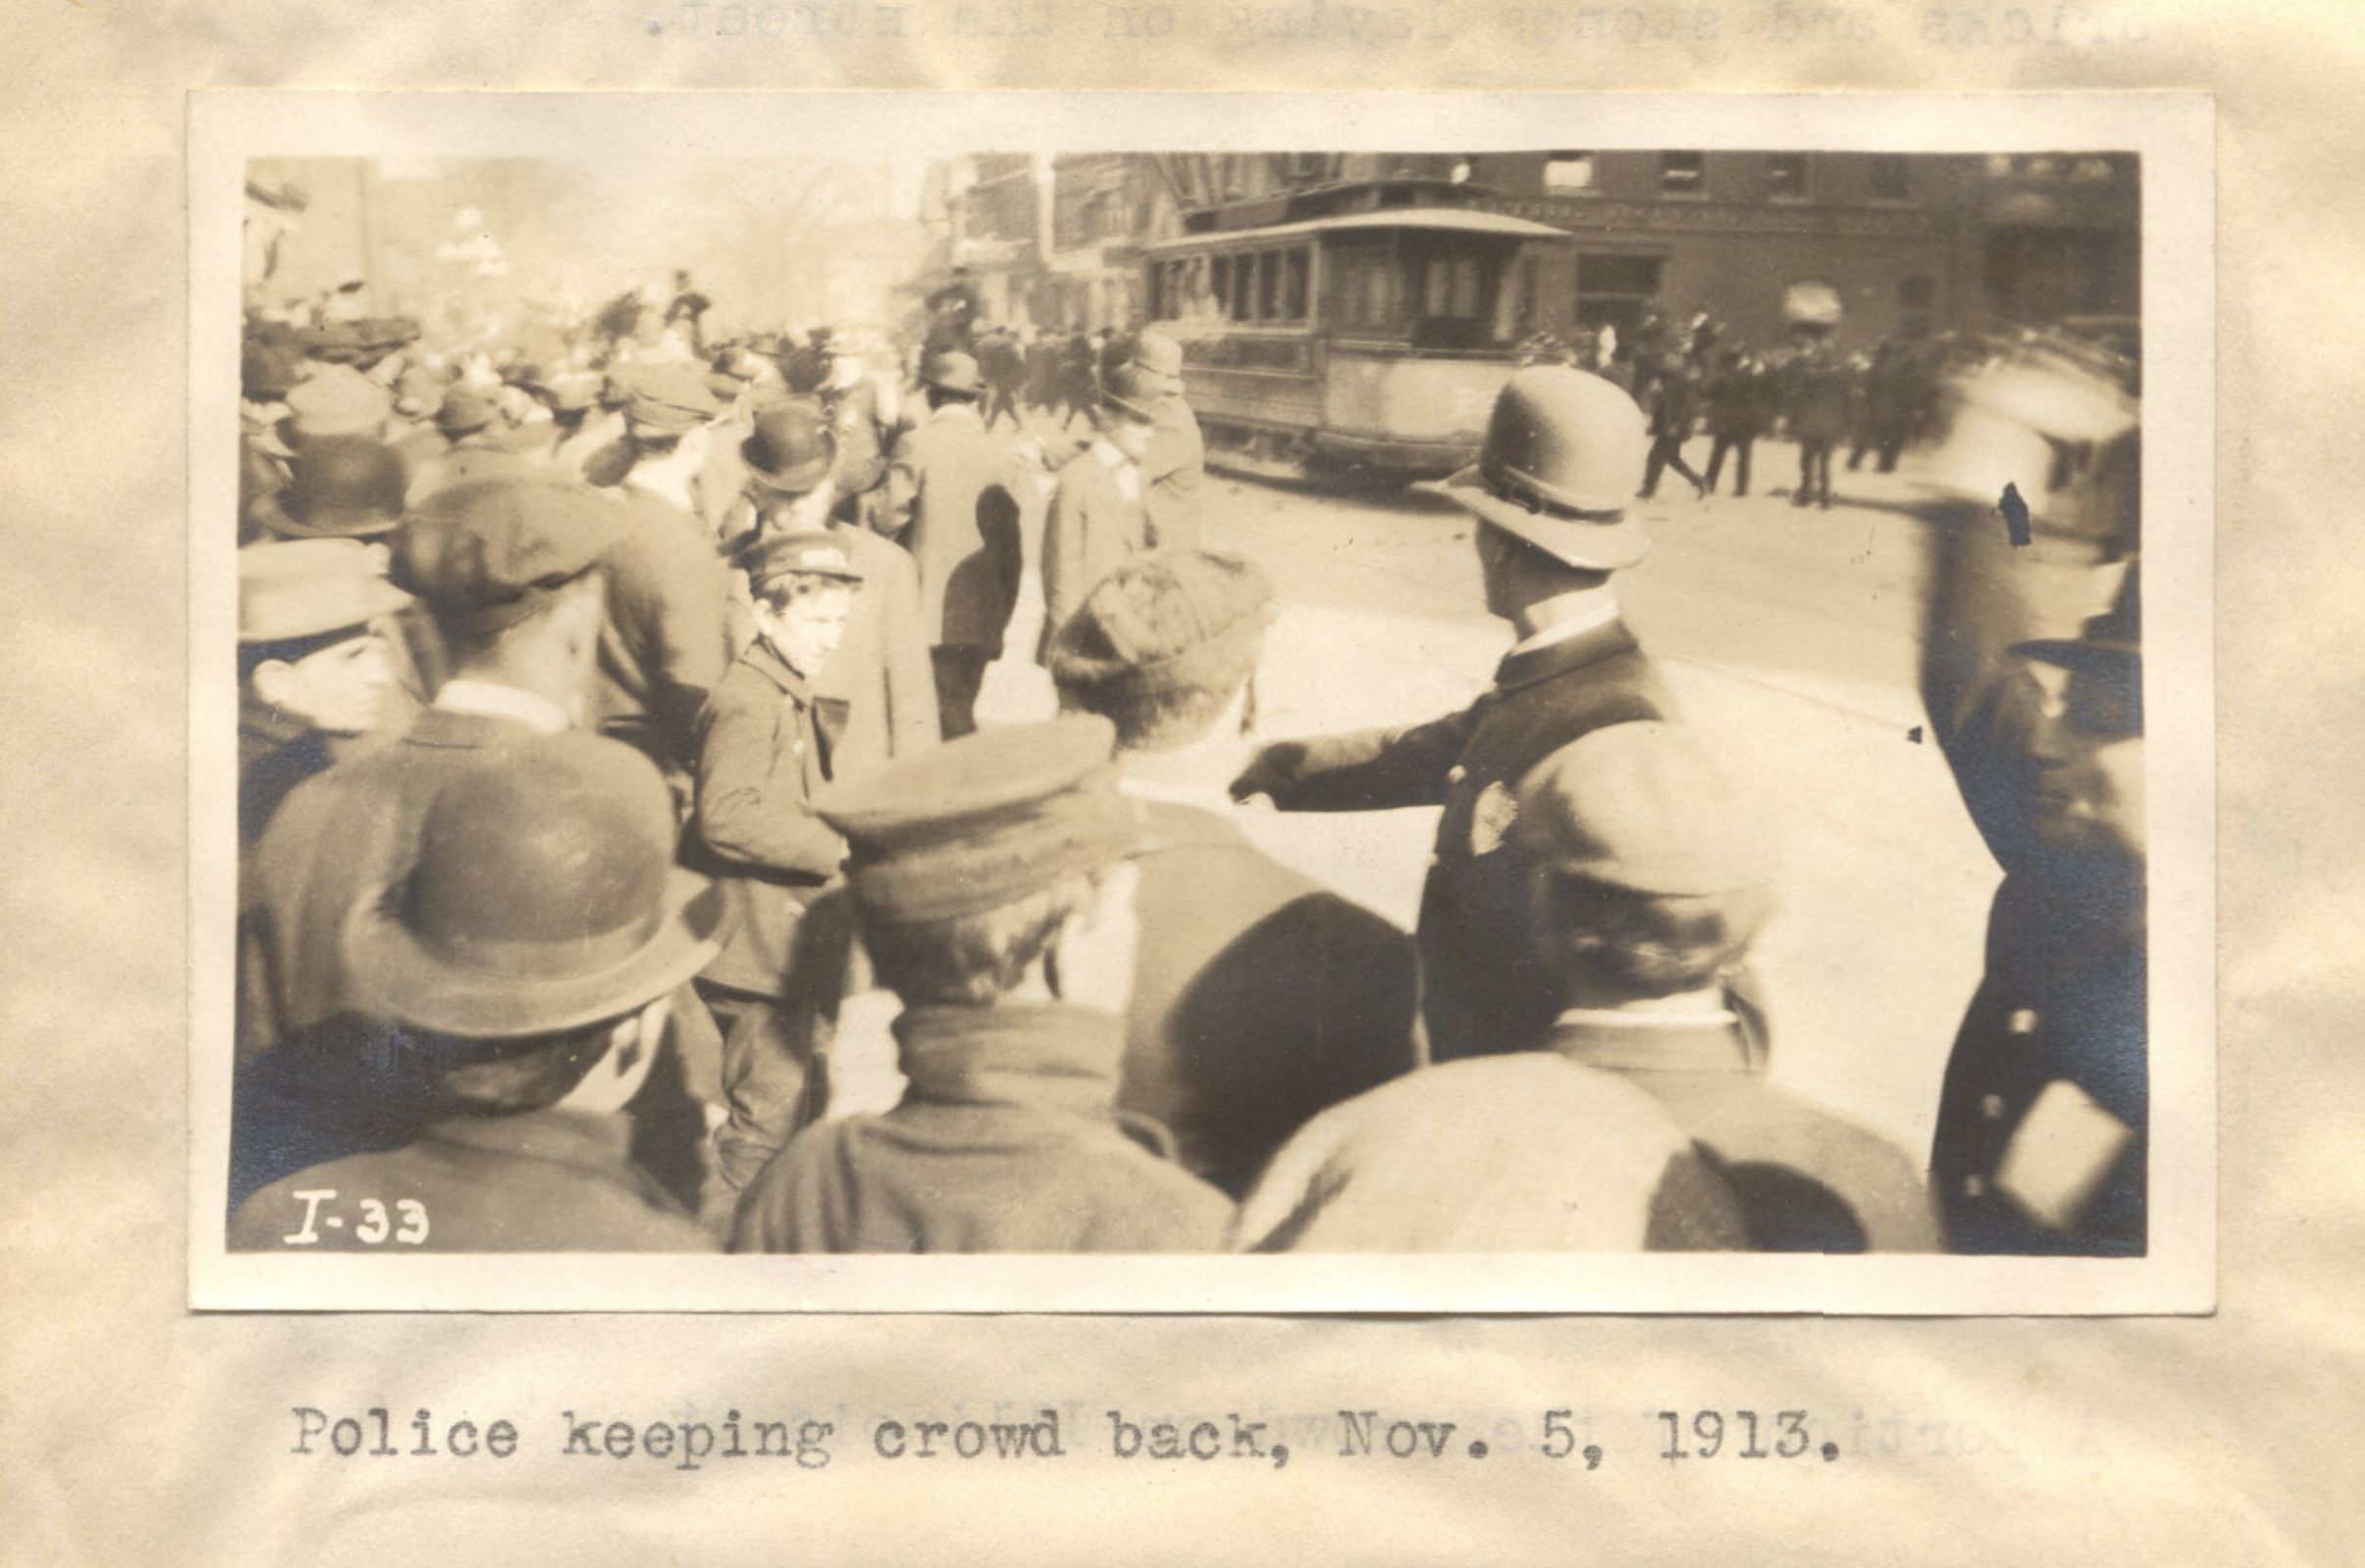 A police officer holds back a crowd. A streetcar runs down the road in the background.